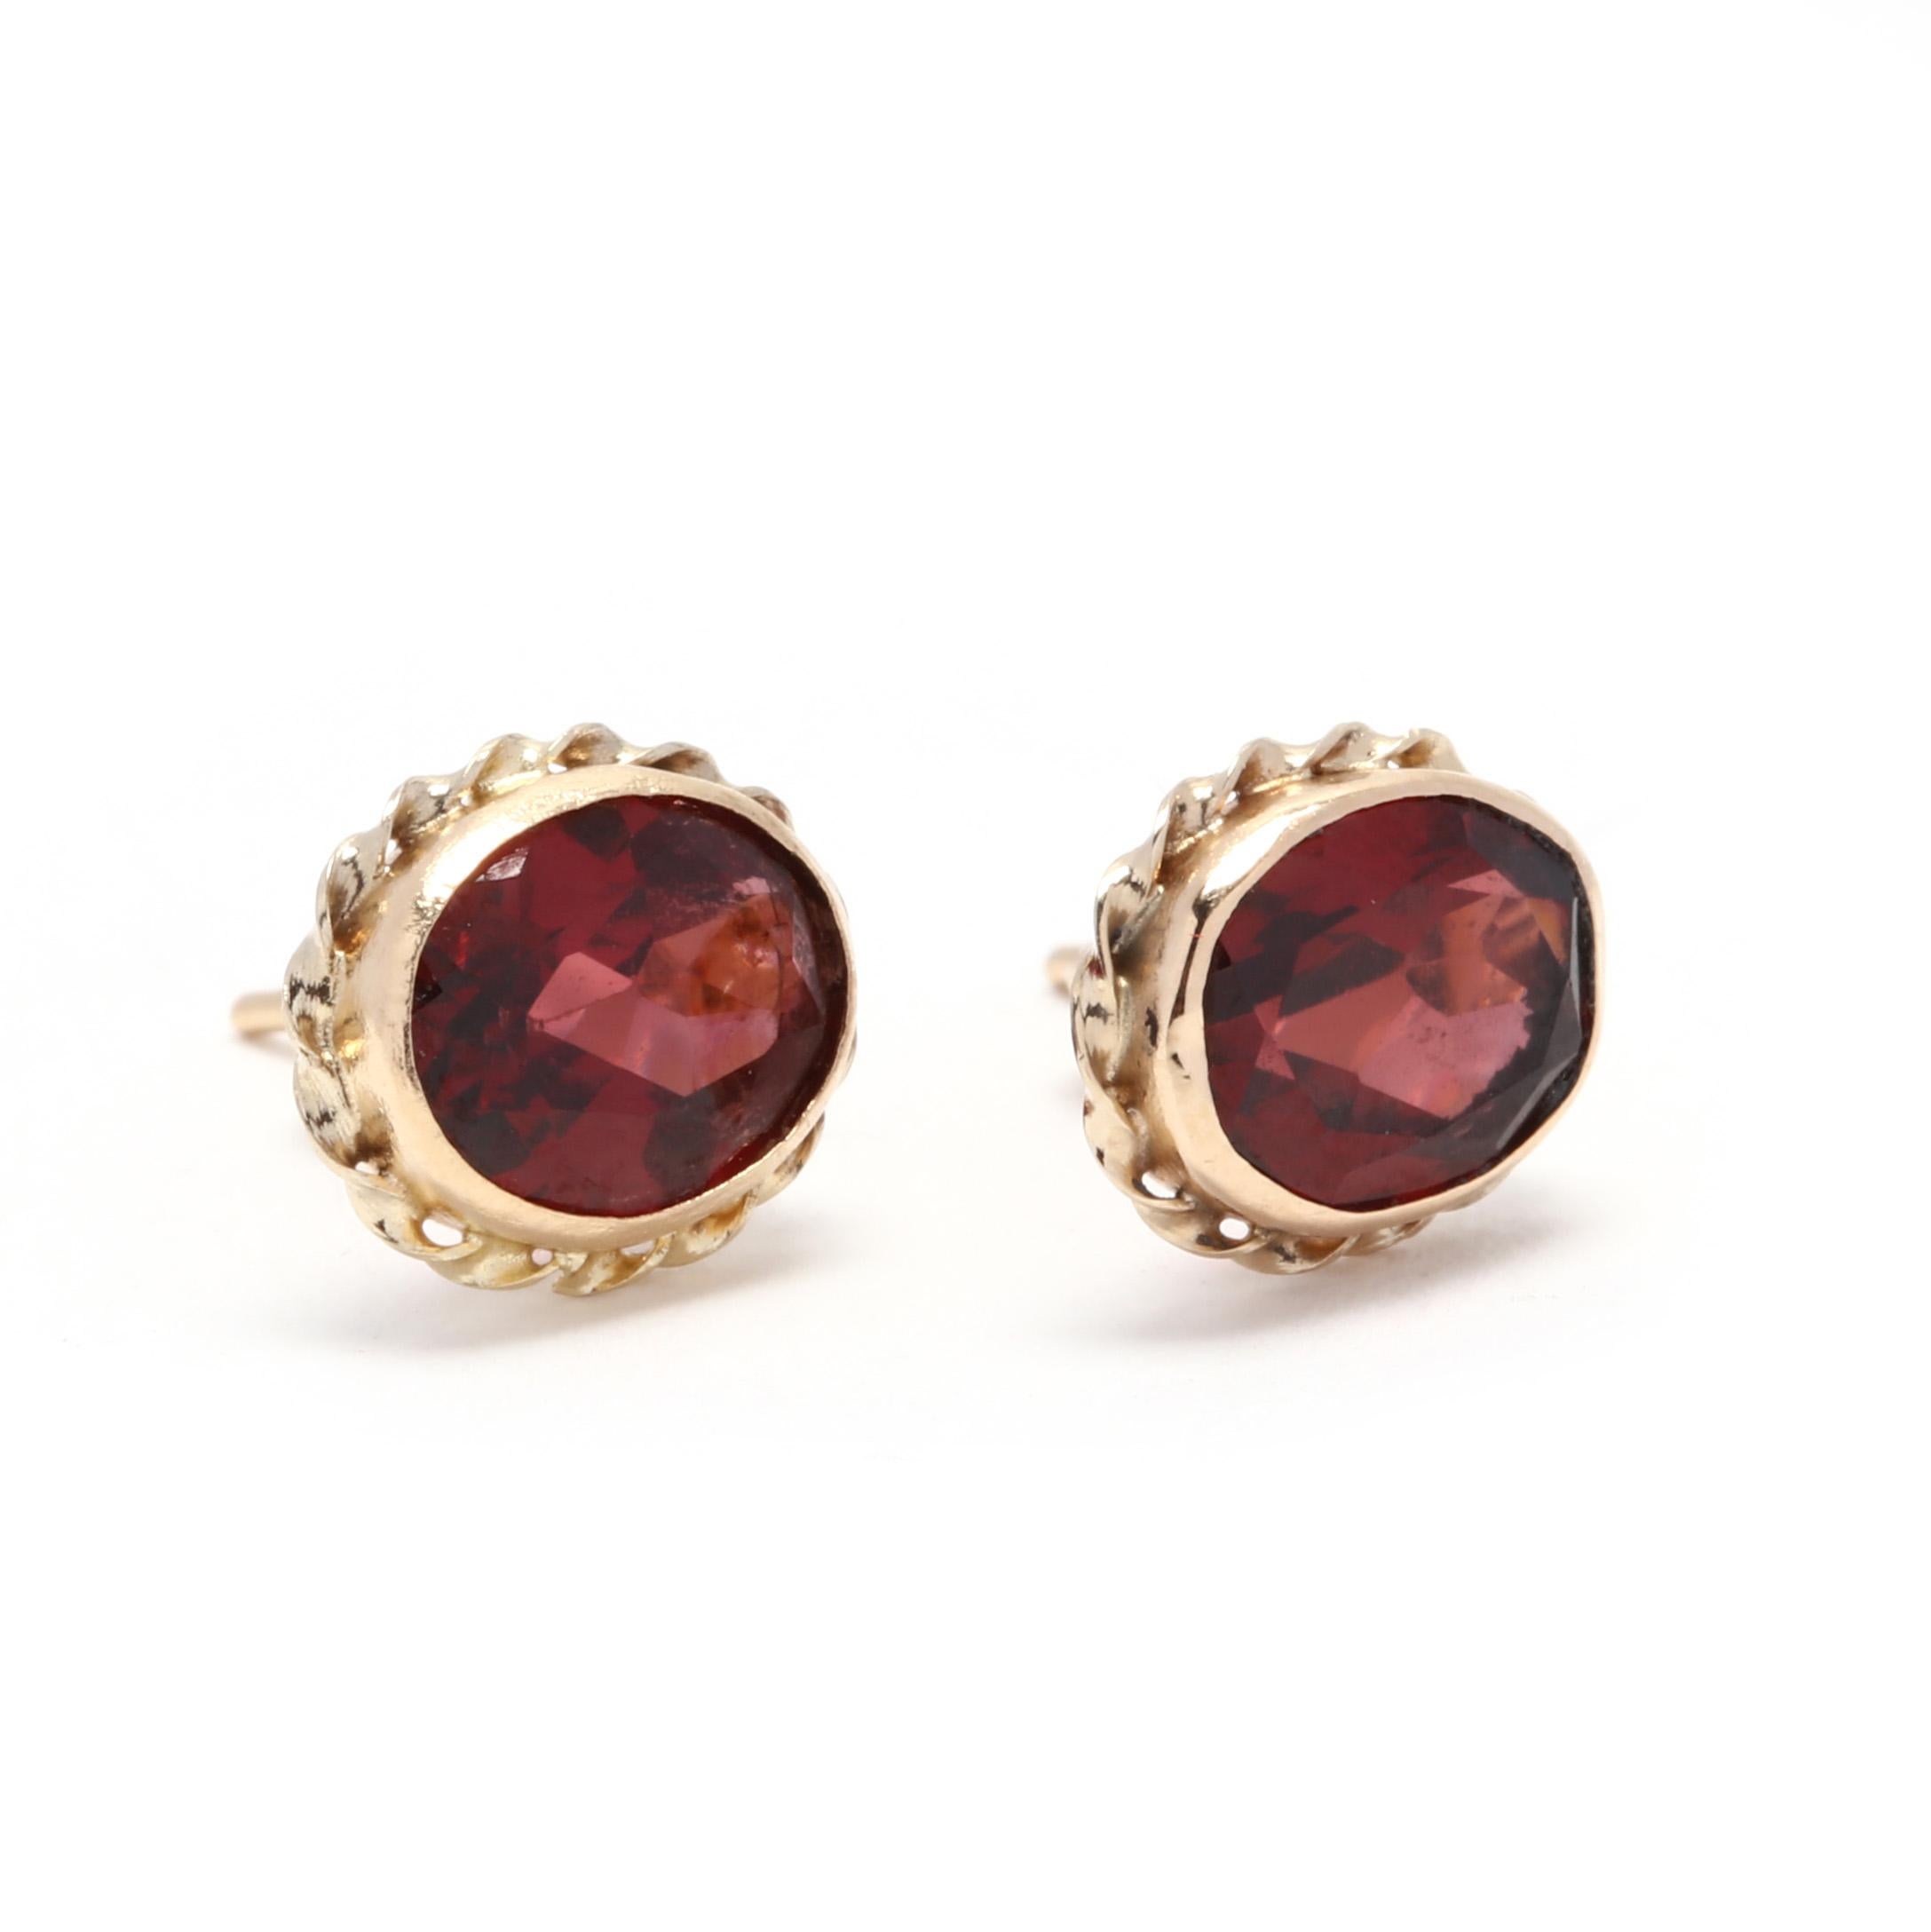 A pair of 14 karat yellow gold and garnet rope stud earrings. These earrings feature bezel, oval cut garnet stud surrounded by a twisted rope design and with push back closures.

Stones:
- garnet
- oval cut, 2 stones
- 7.5 x 5.5 mm
- approximately 2